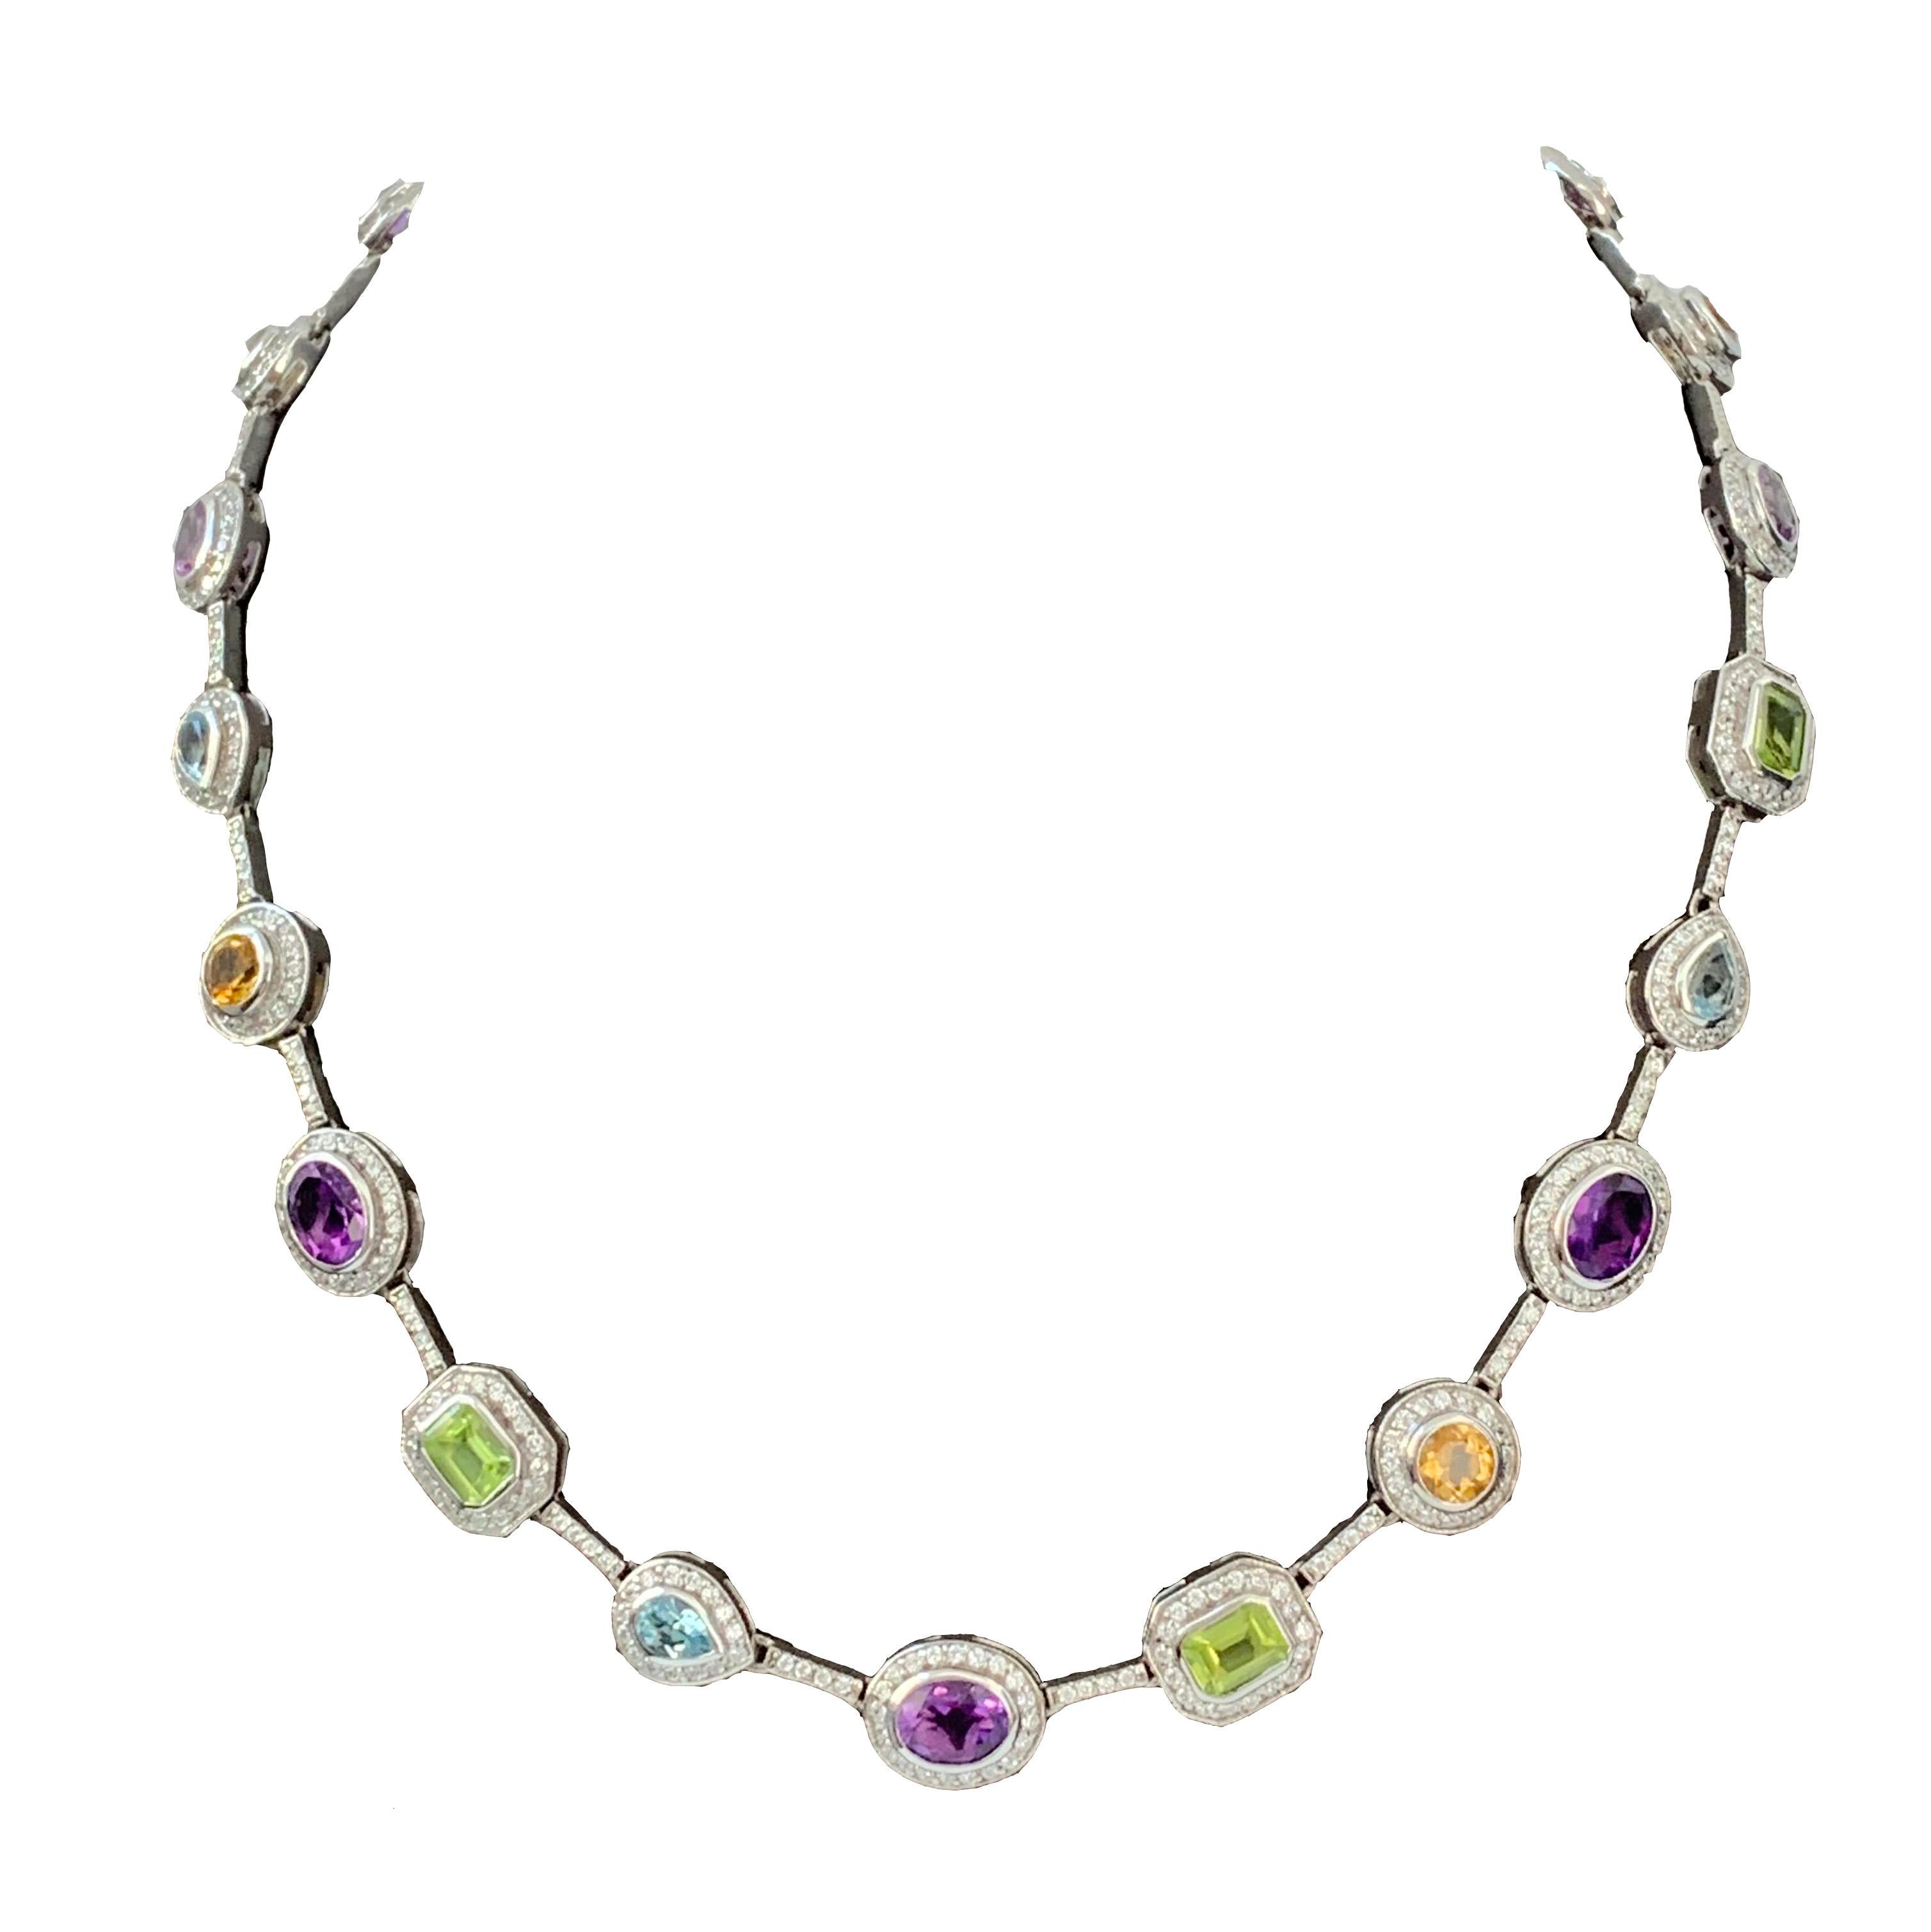 Beautiful multicolor gemstones (Amethyst, Citrine, Blue Topaz, and Peridot) adorned with round Cubic Zirconia cecklace. Handset on platinum rhodium plated sterling silver. Push clasp closure with 